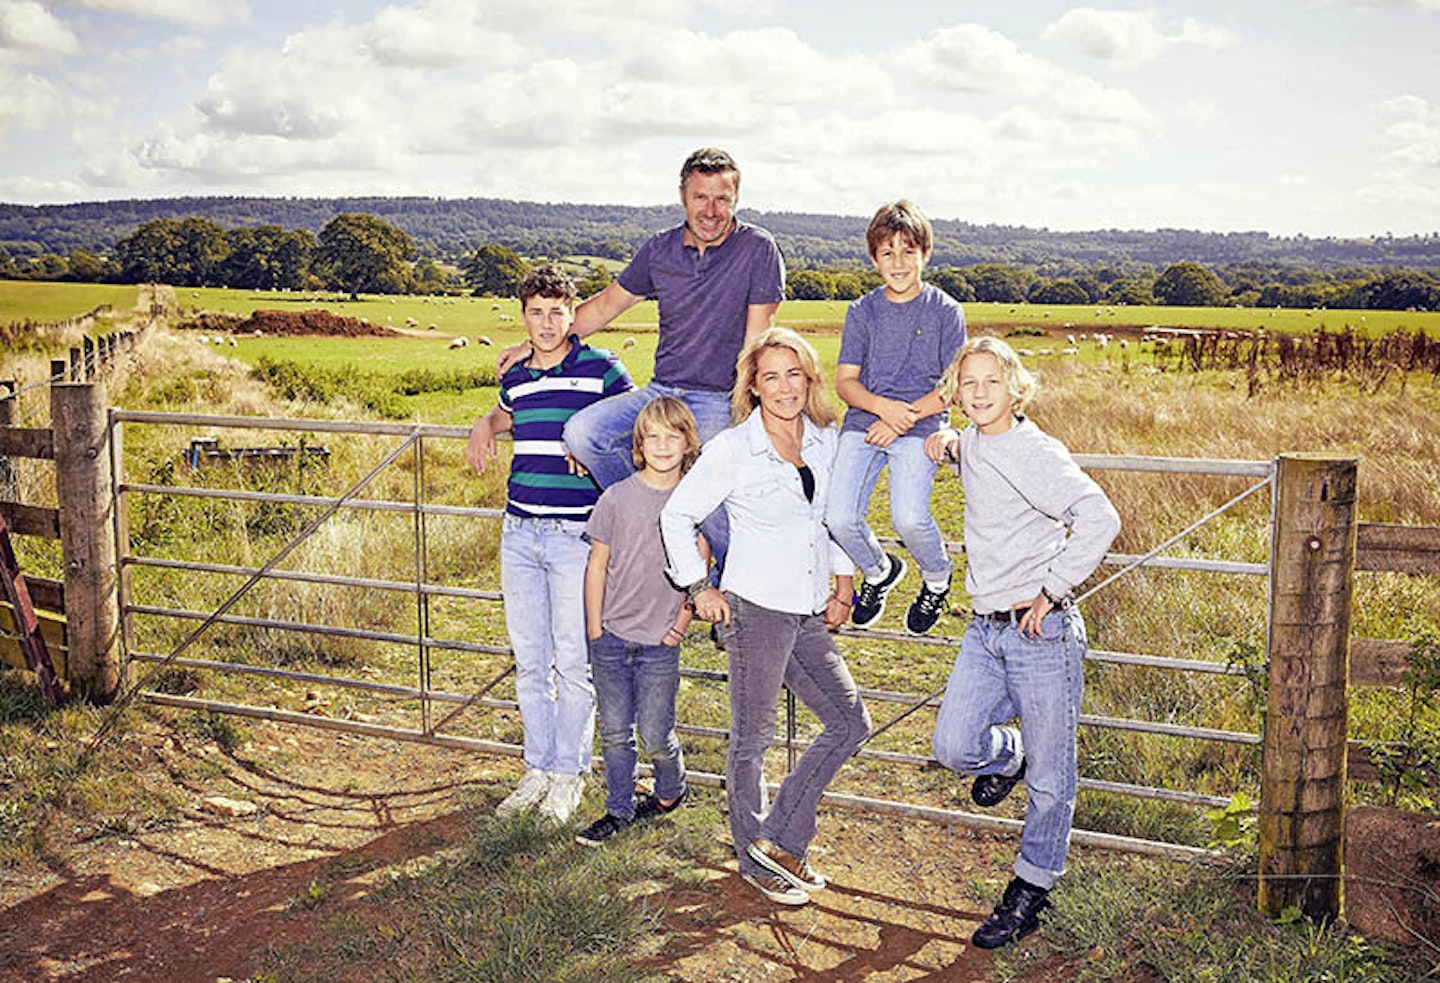 Sarah Beeny new life in countryside